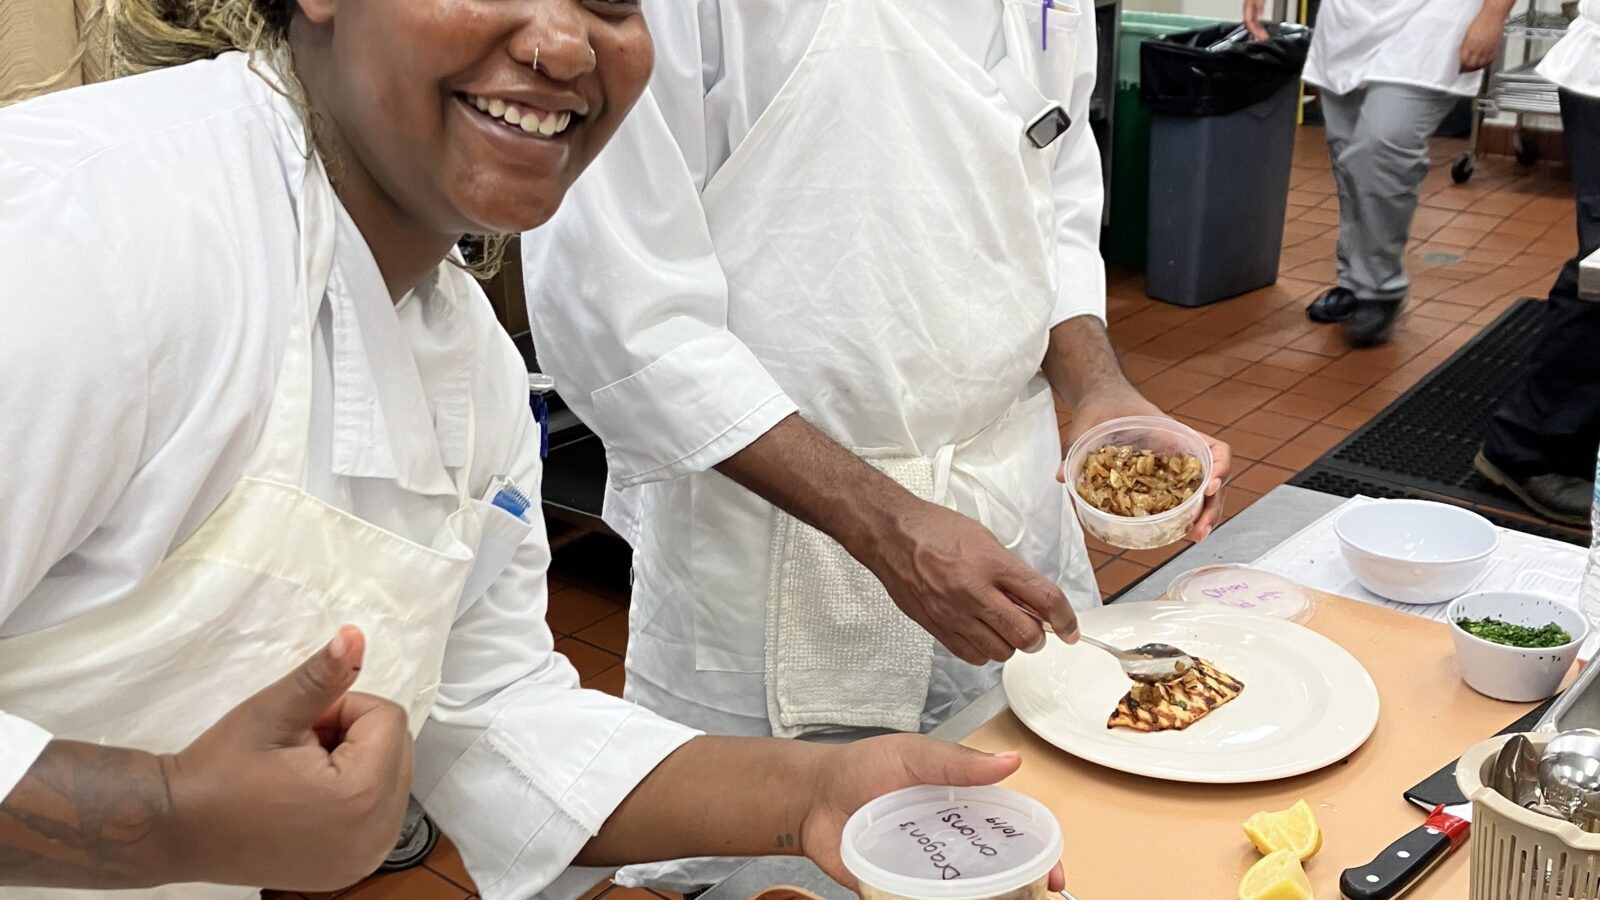 Two chefs in the Fresh Starts Culinary Academy prepare plates of food